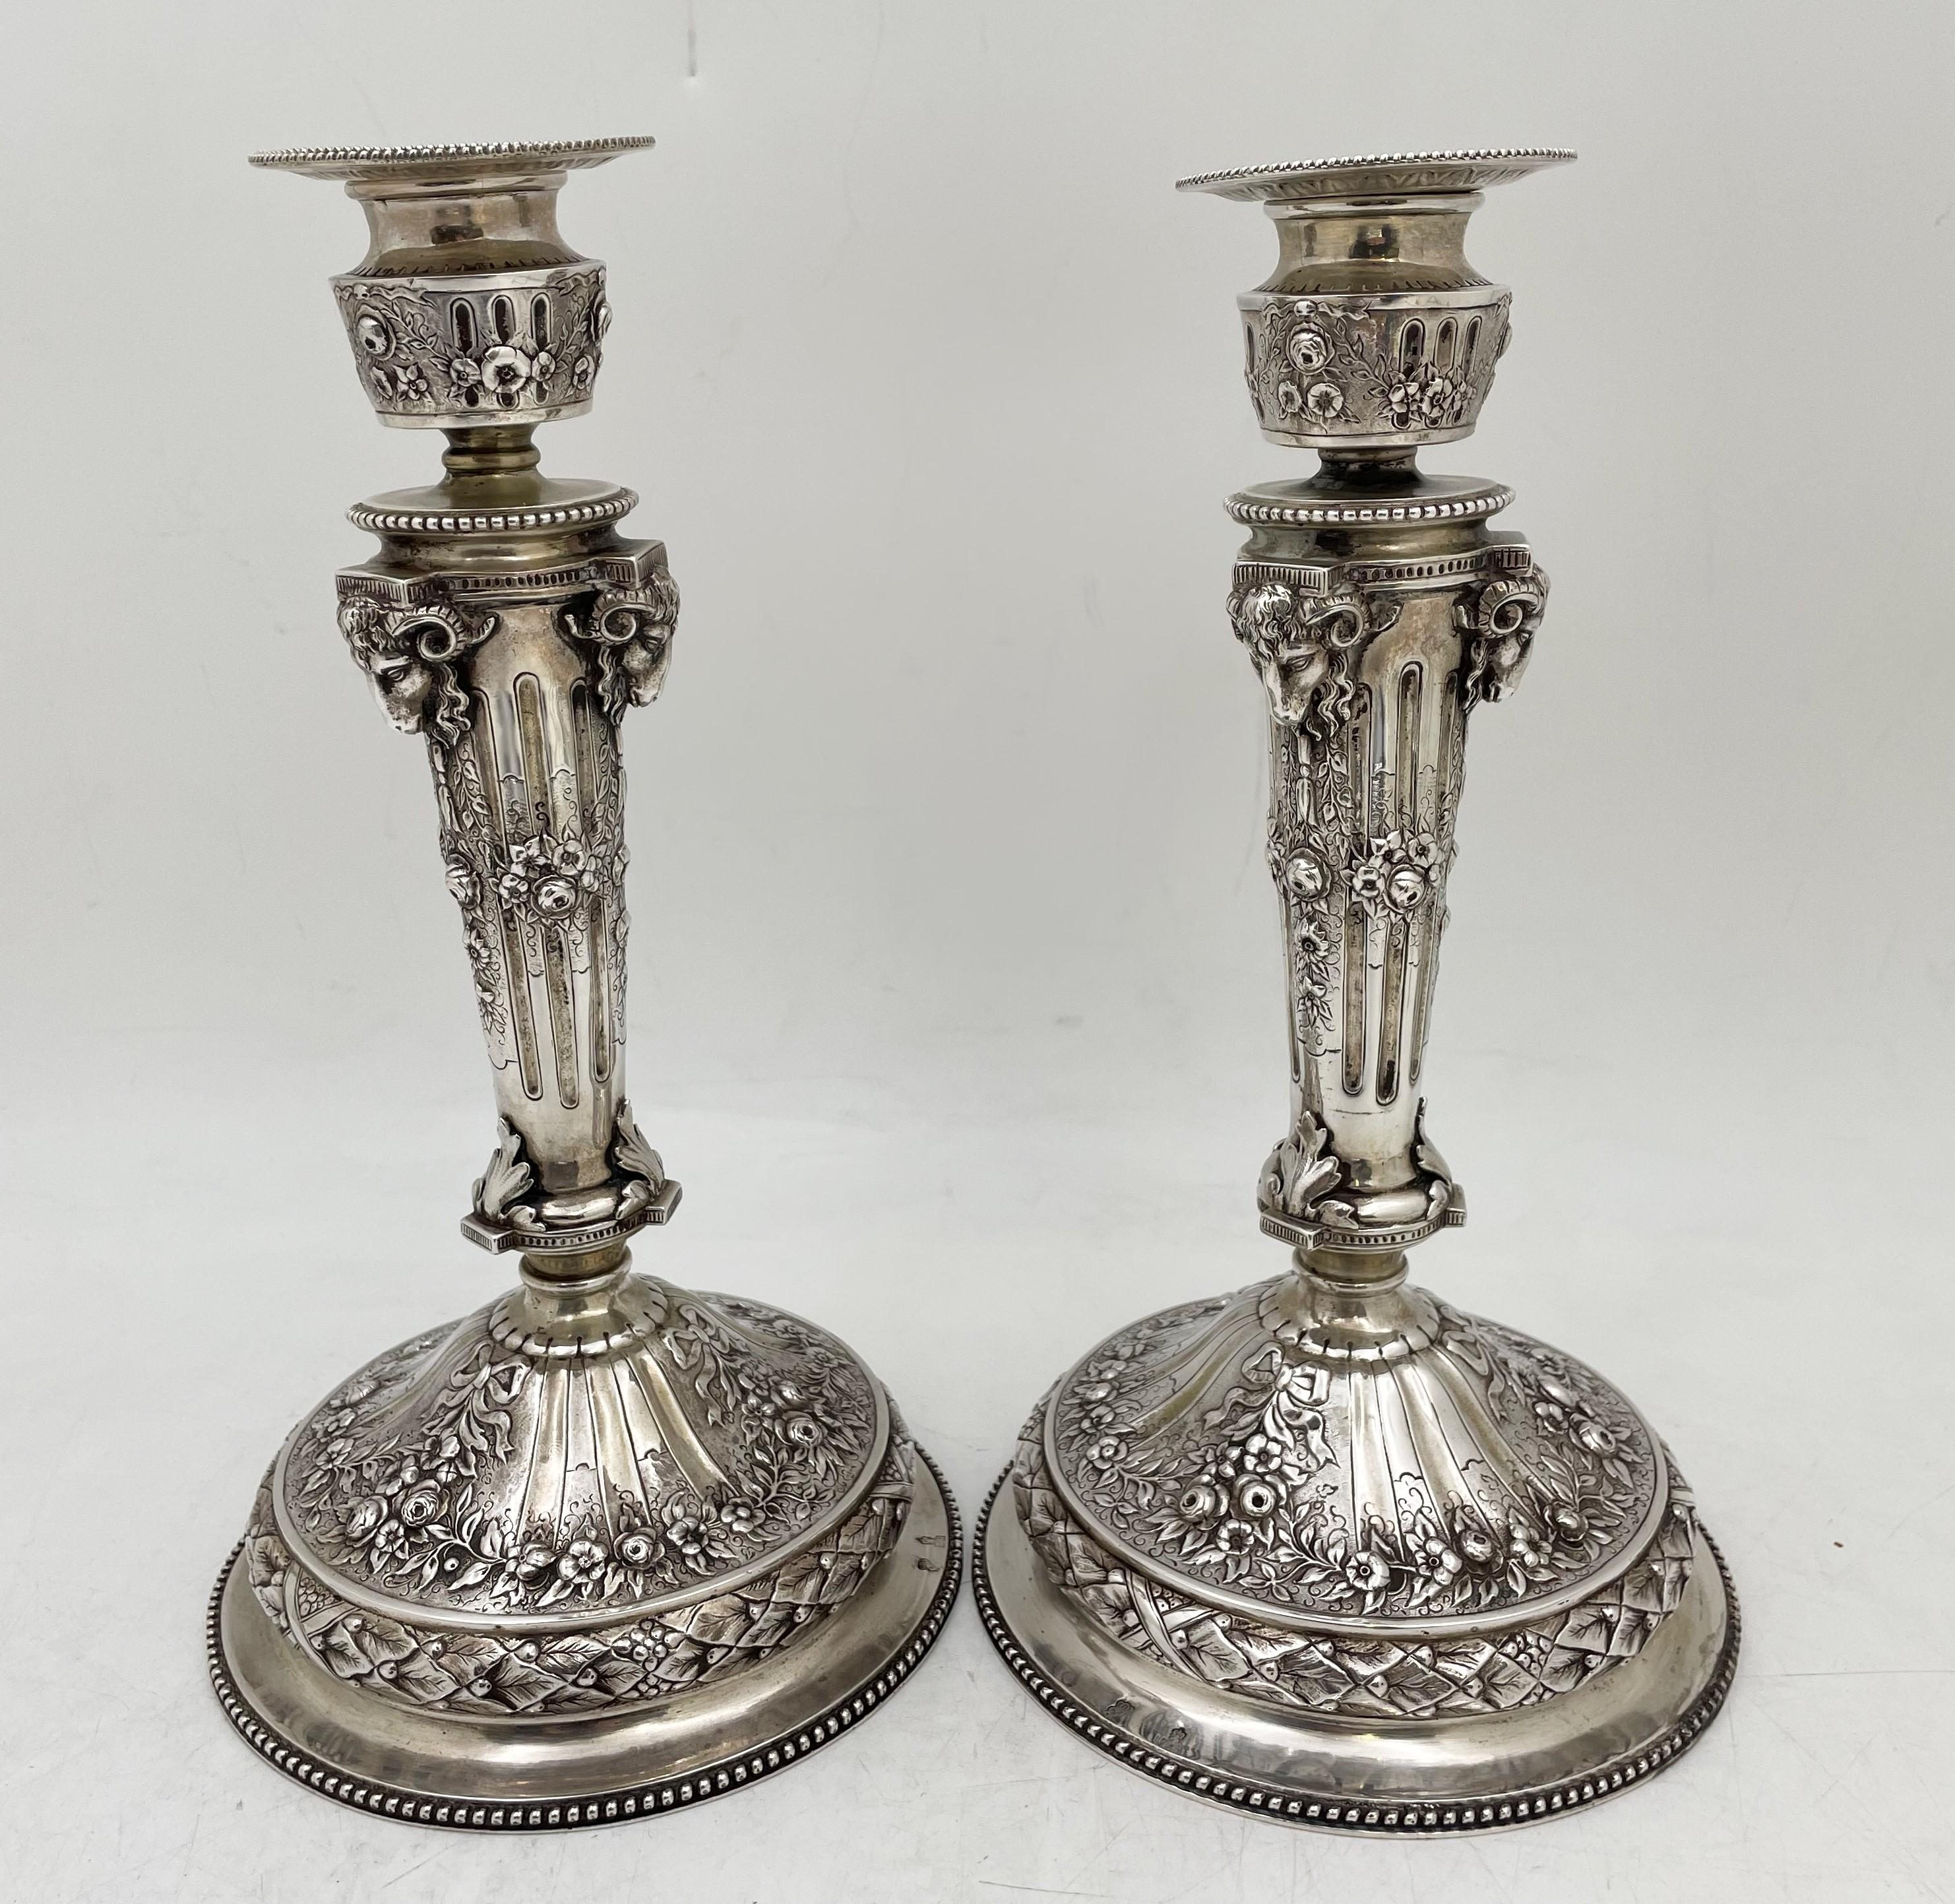 Continental Chased silver Candlesticks from 19th century in a floral pattern. These unique works feature ram's heads and a rose pattern that was hand chased in beautiful detail. These pieces are 10